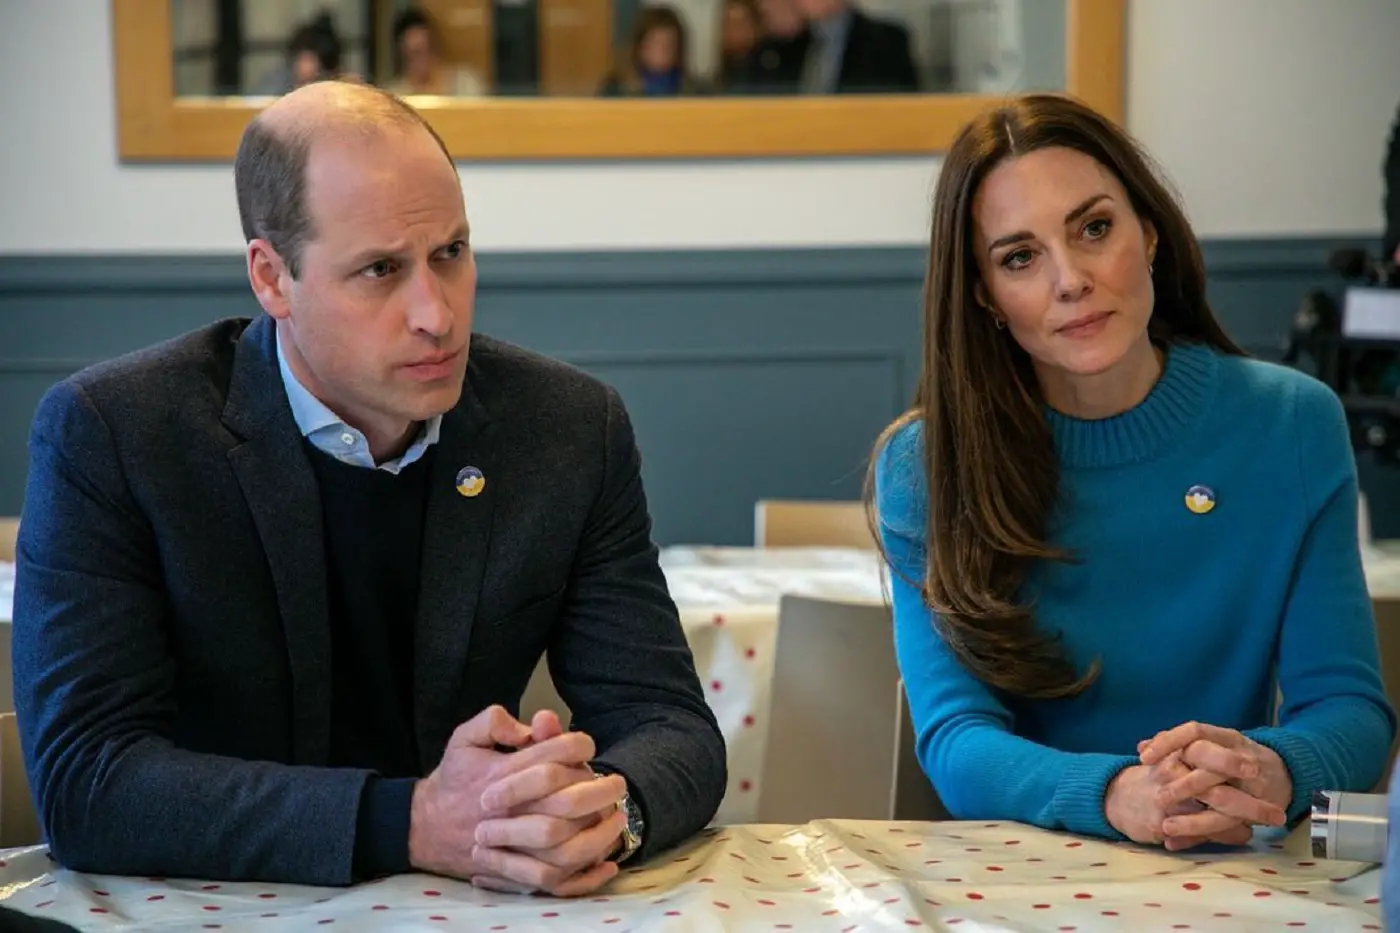 The Duke and Duchess of Cambridge visited Ukrainian Cultural Centre